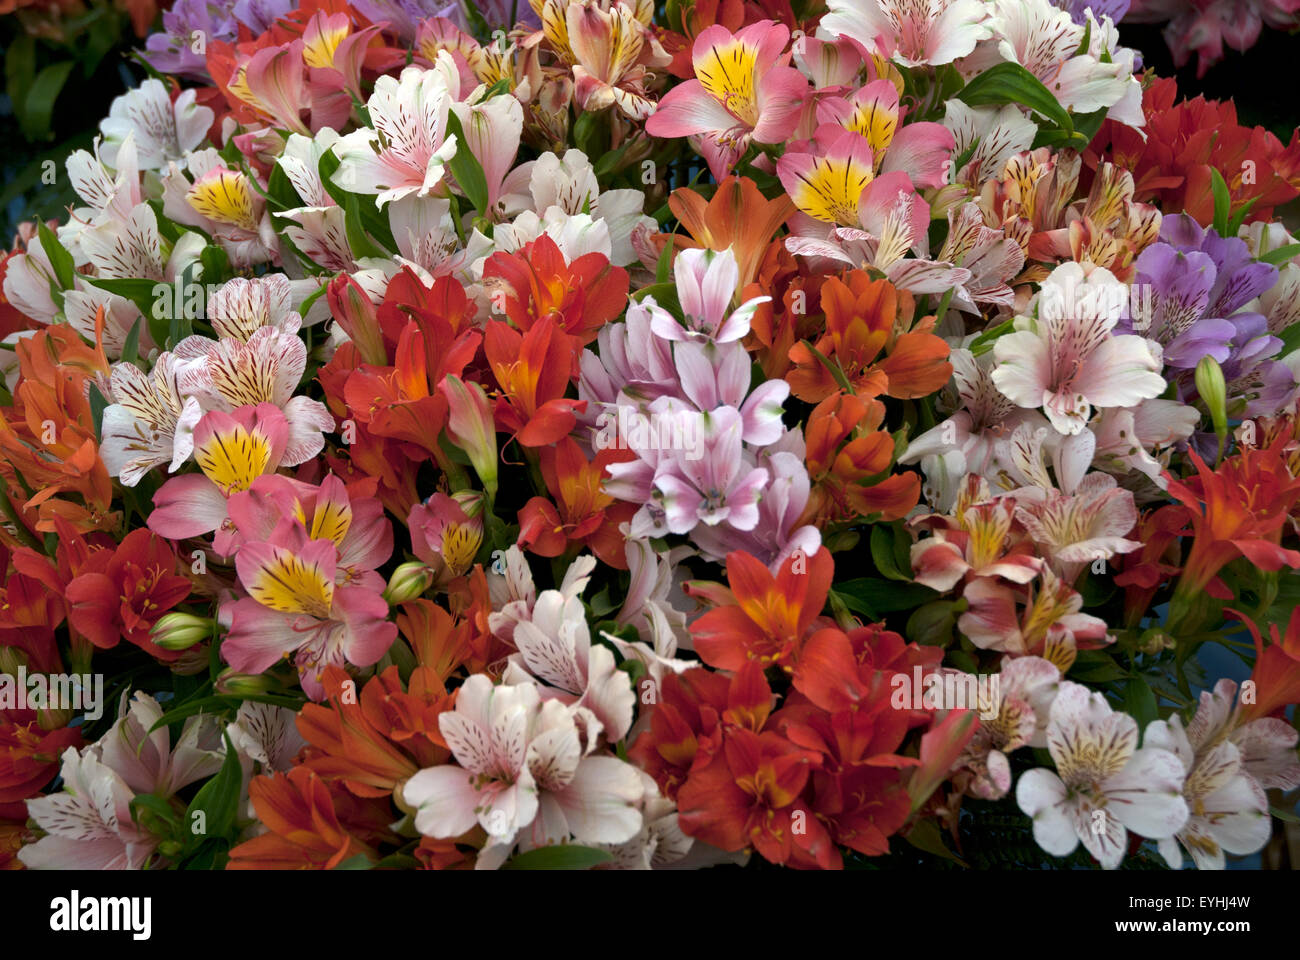 Multi-coloured flowers of the Alstroemeria or Peruvian lily or lily of the Incas in a west London garden, England UK Stock Photo